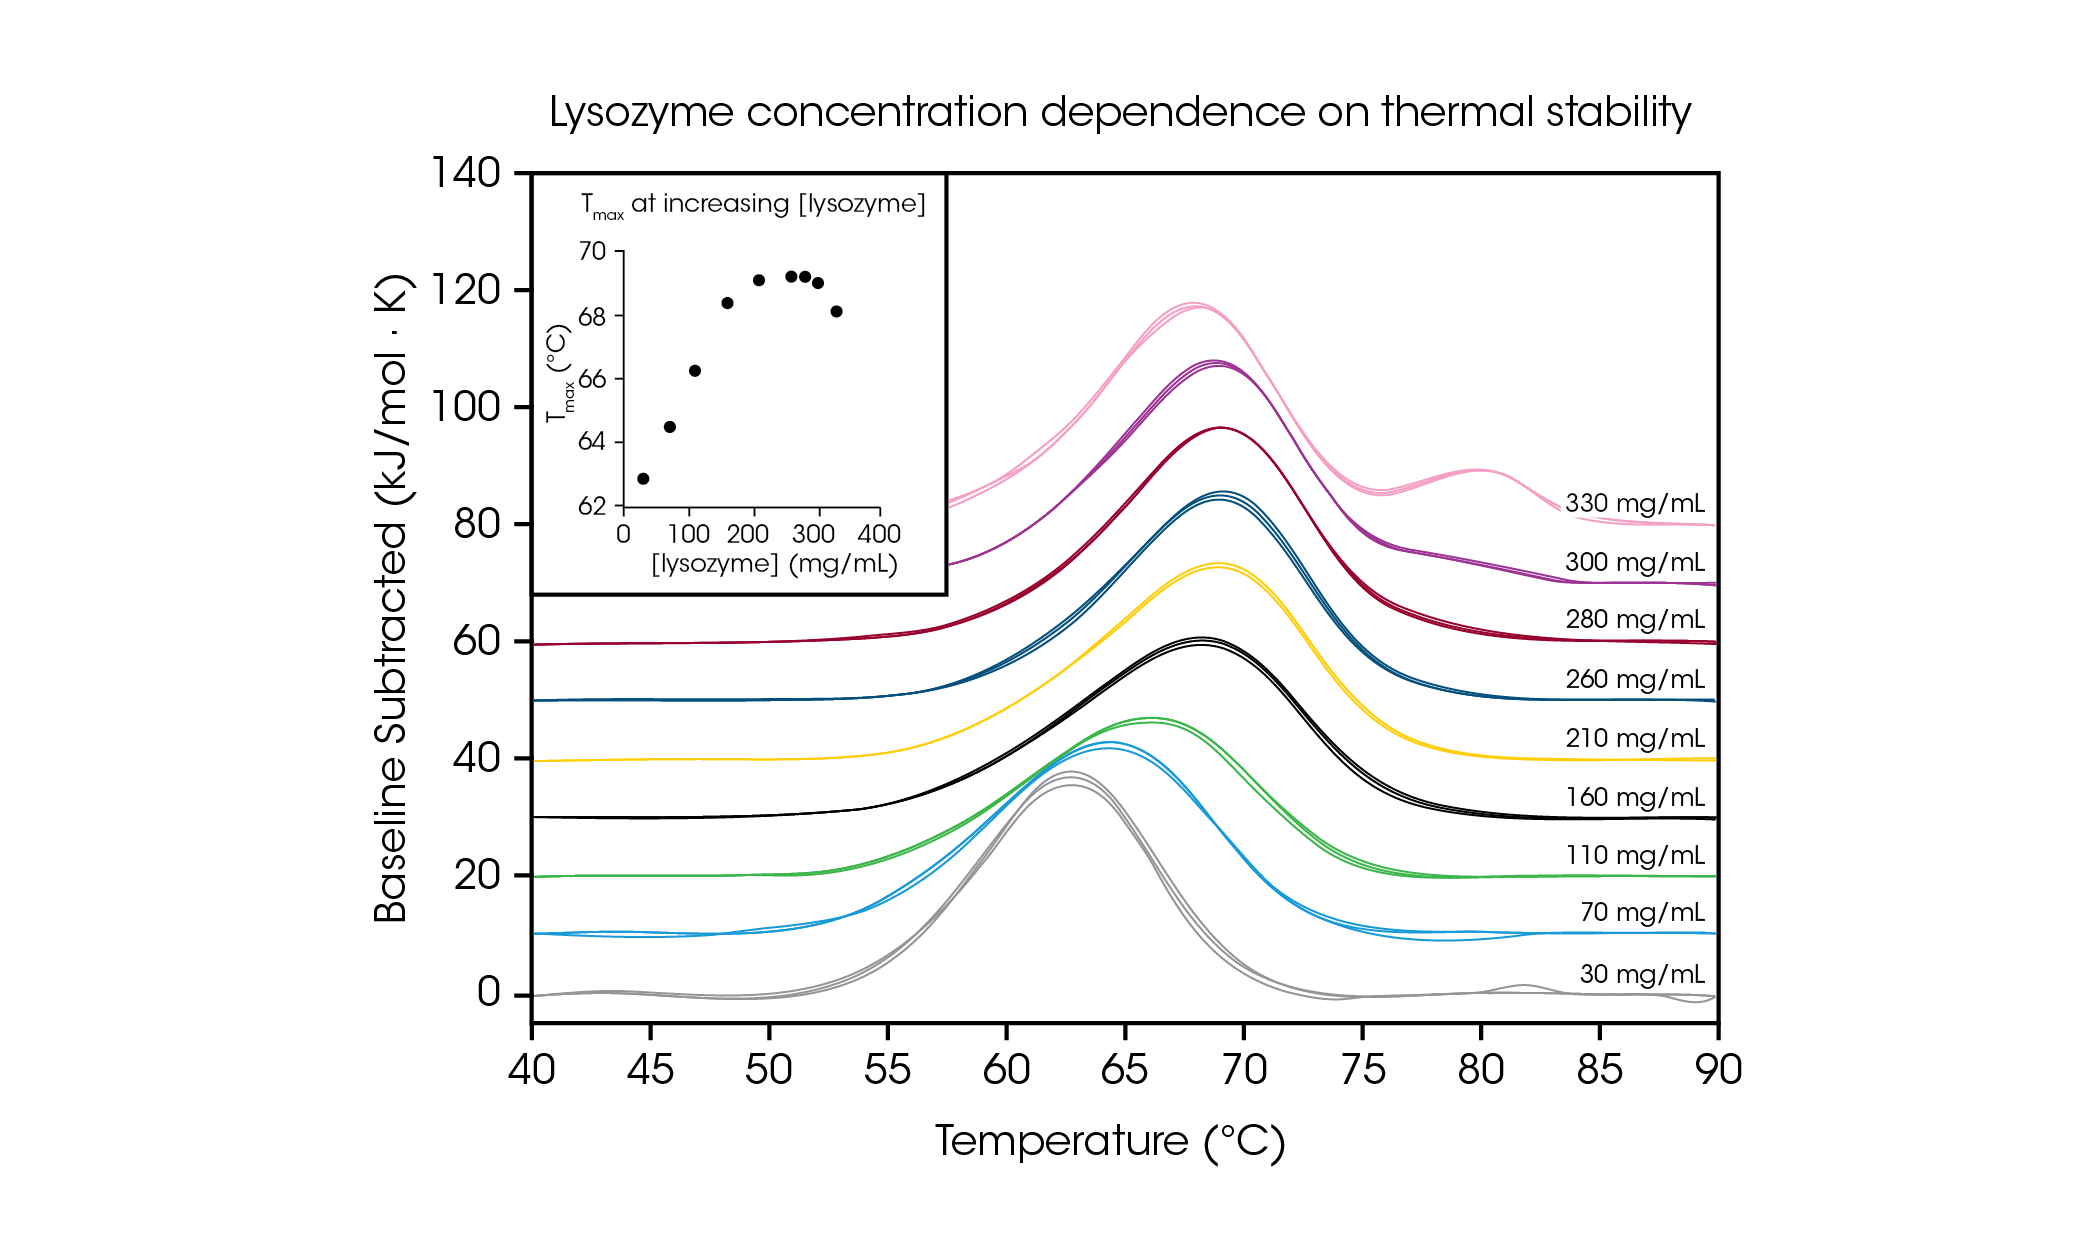 Figure 4. Short term thermal stability of lysozyme at concentrations from 30 to 330 mg/mL in glycine buffer, data in triplicate. Inset: Average Tmax relative to lysozyme concentration.